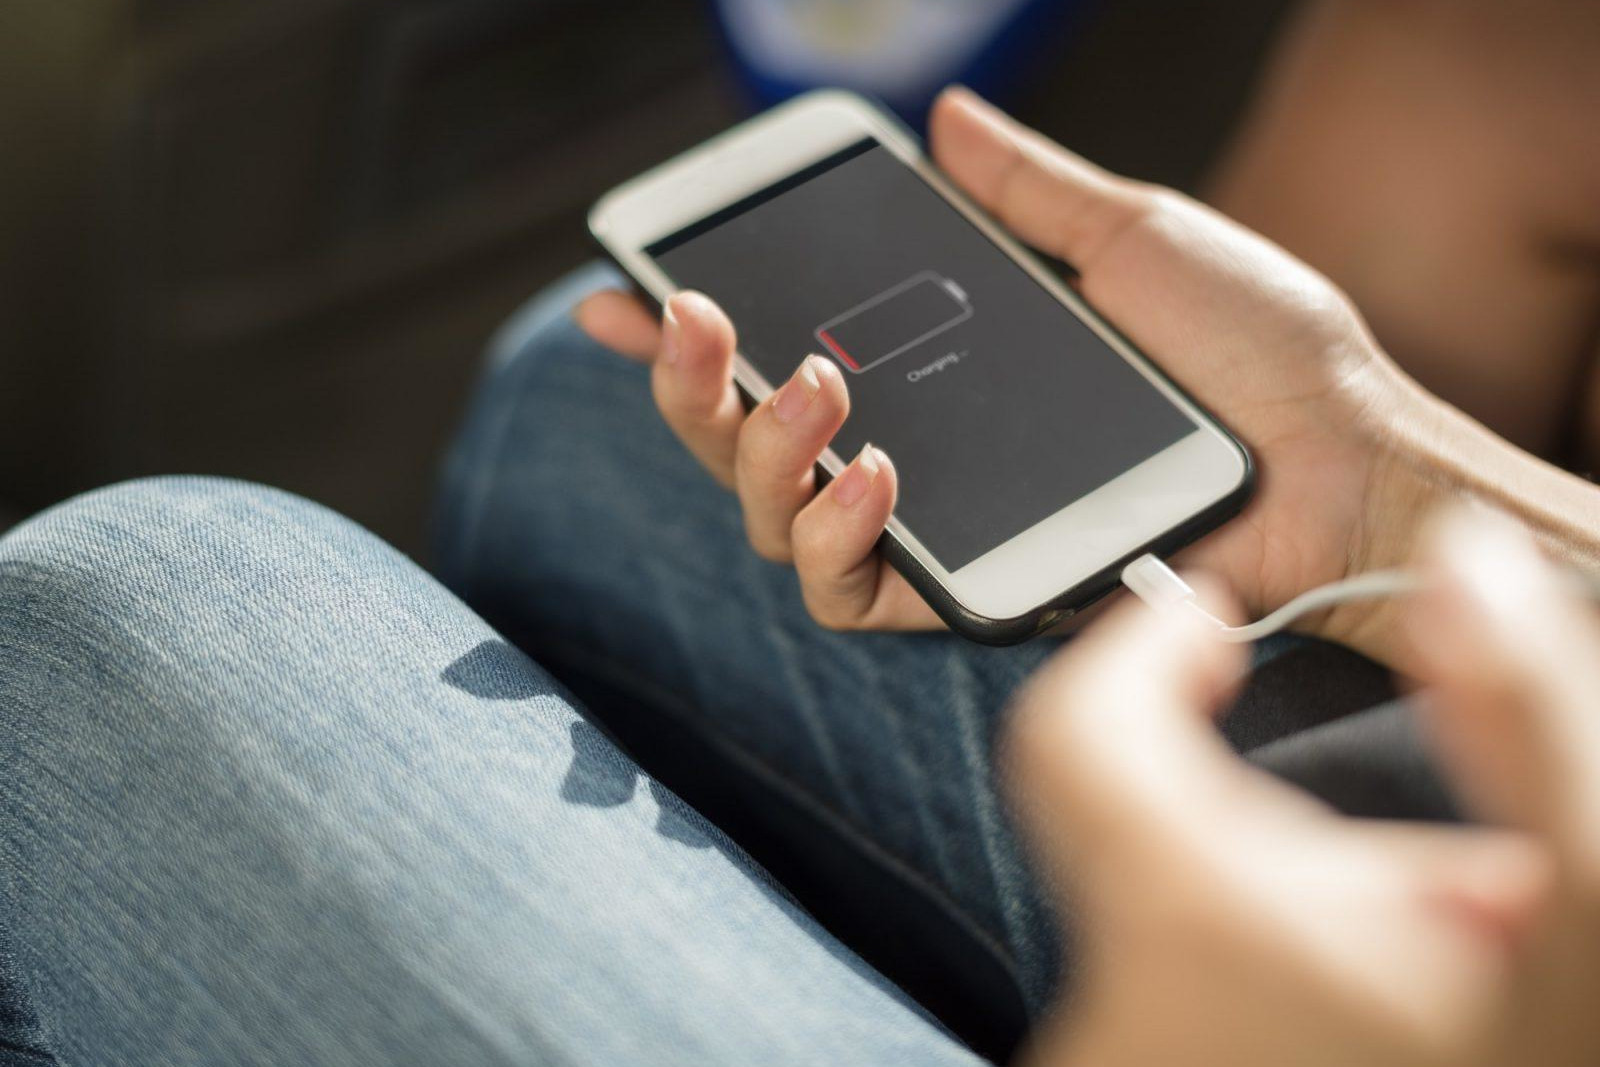 Smartphone Battery Life: How to Extend the Life of Your Smartphone Battery